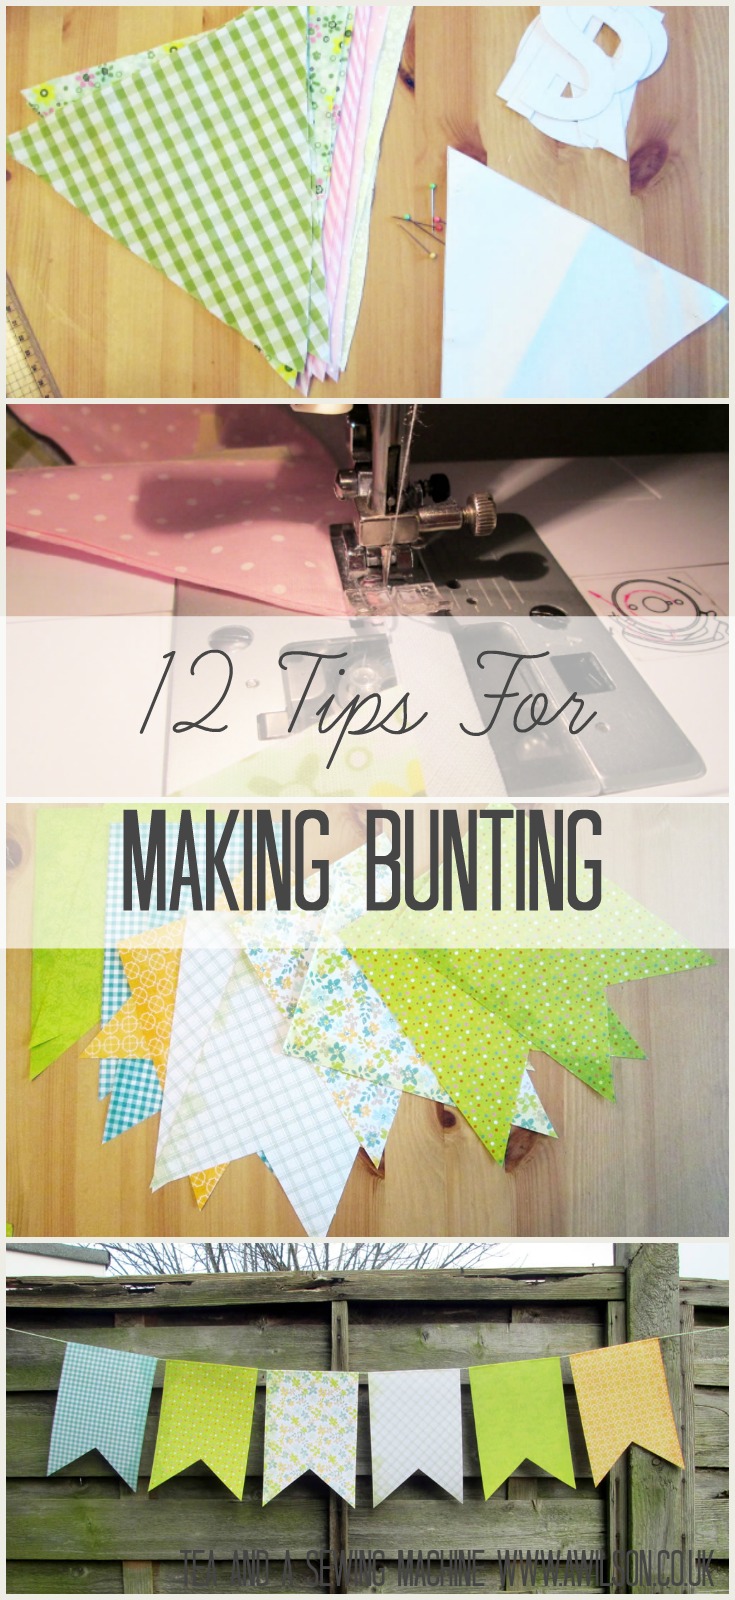 12 tips for making bunting